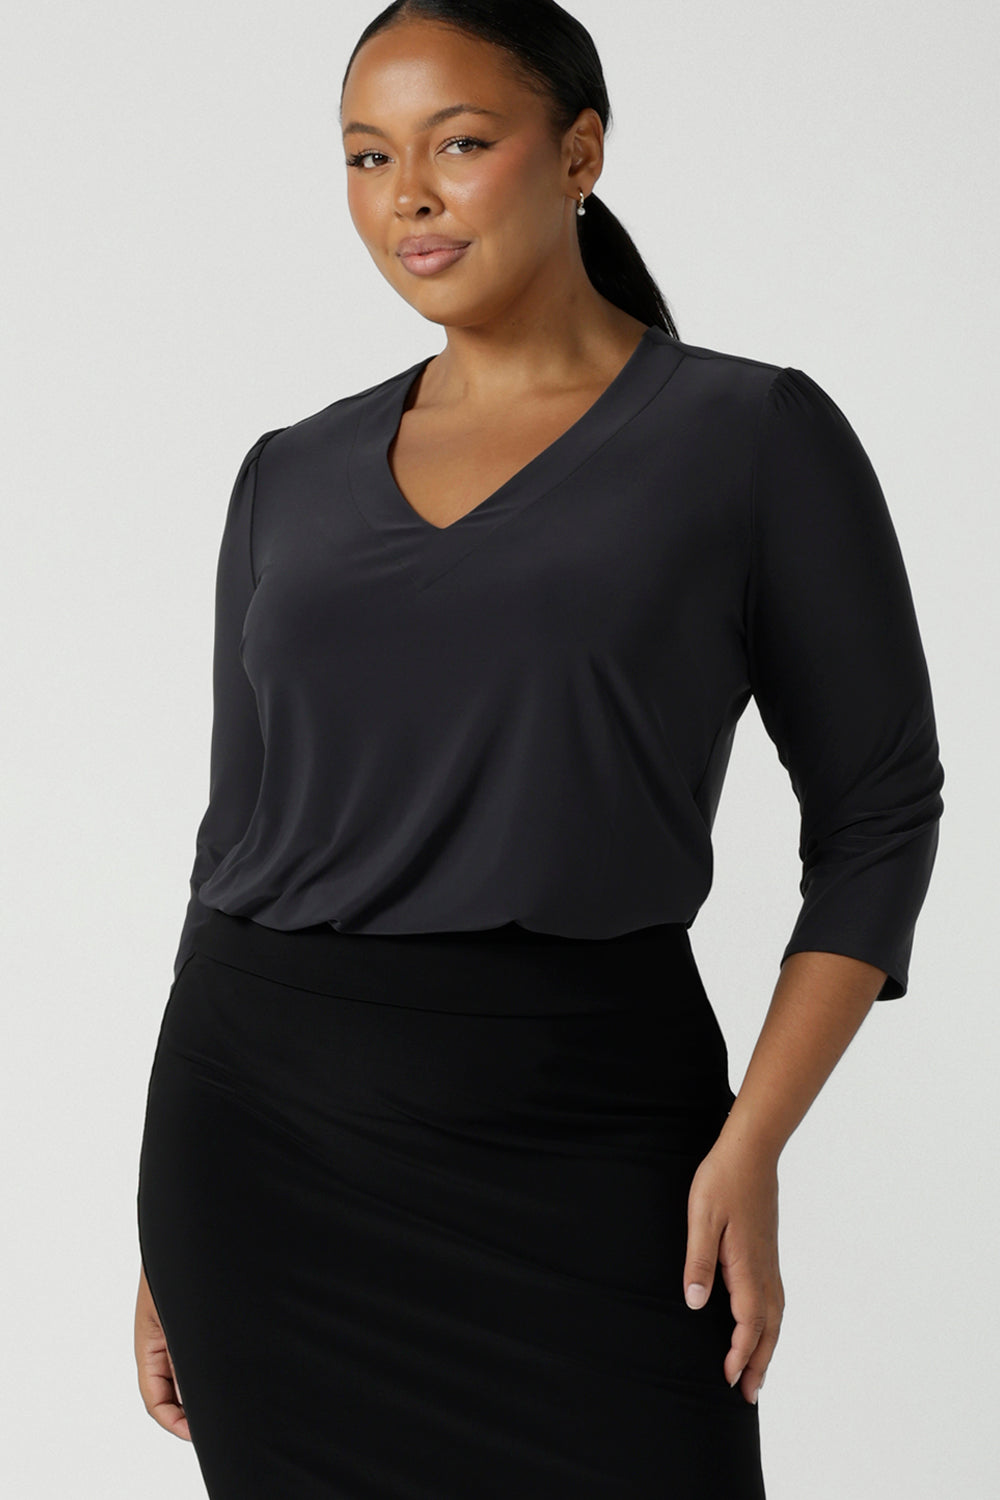 Size 16 woman wears the Vida top in Charcoal, a grey work top for women with a V-neckline. Comfortable corporate workwear for women. Made in Australia for women. Size 8 - 24.